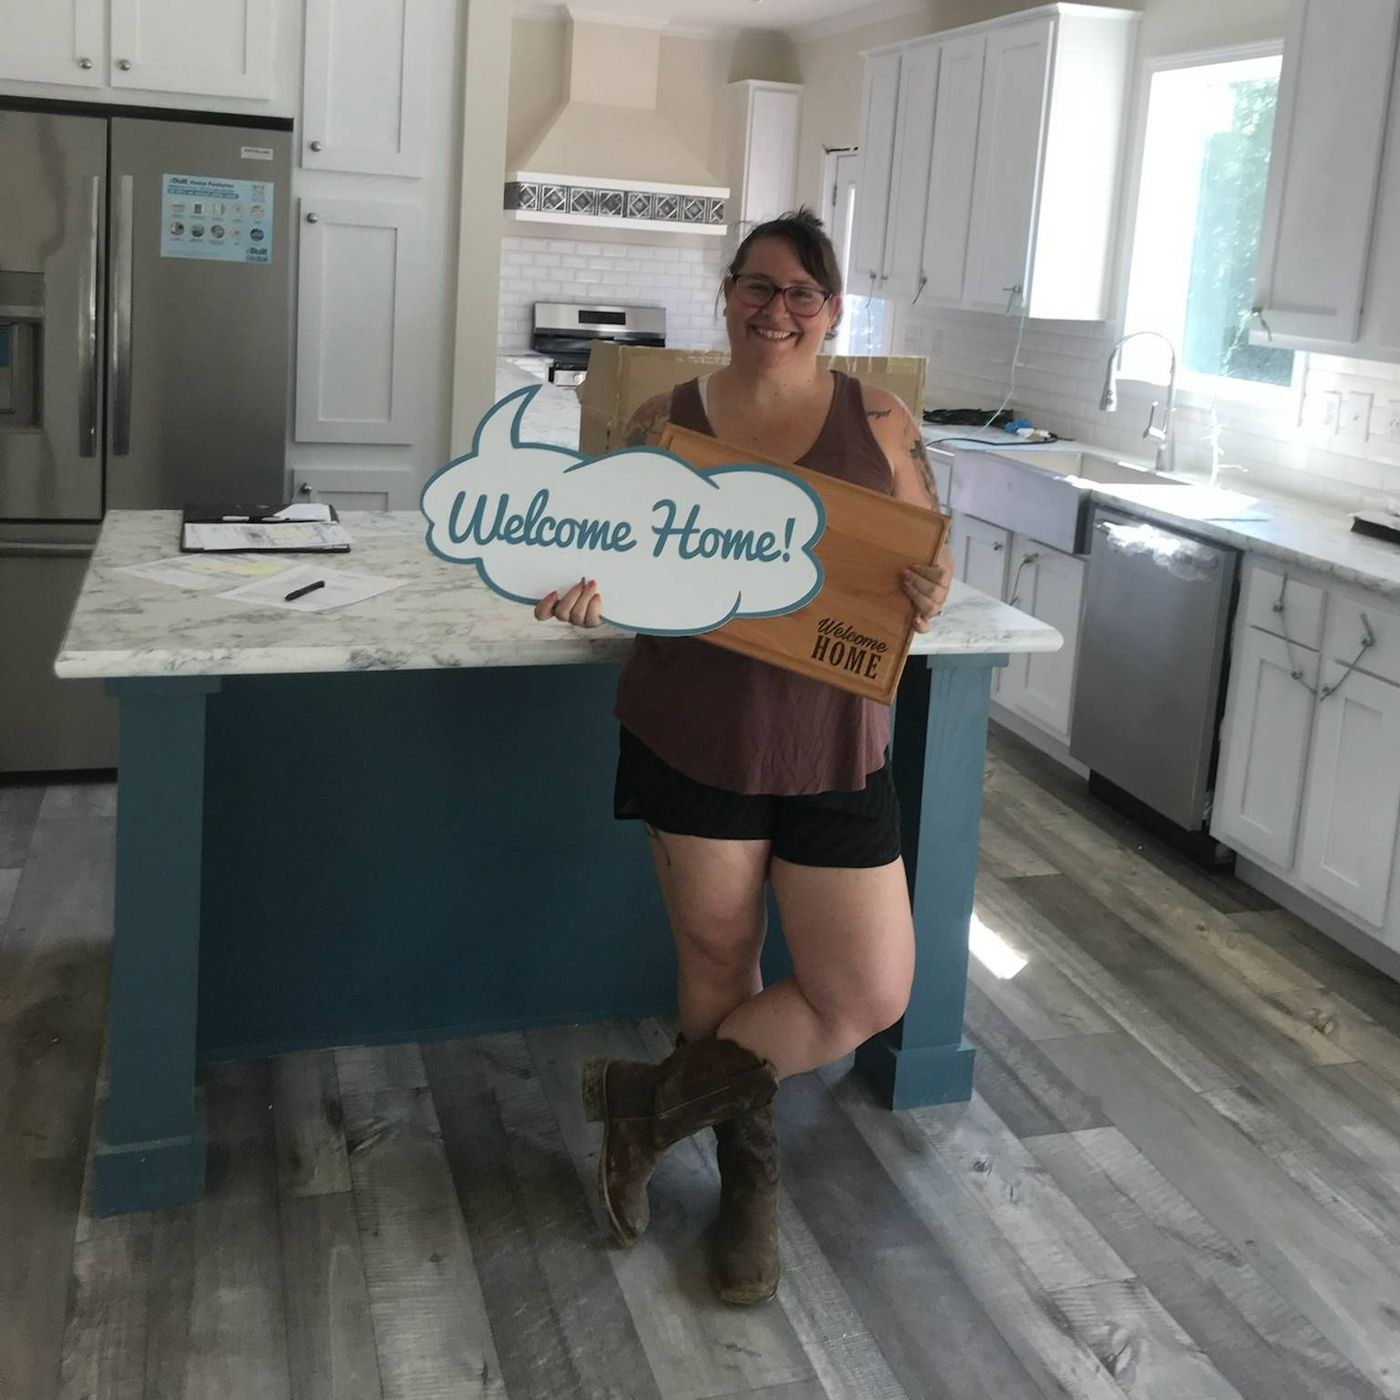 STEVEN B. welcome home image